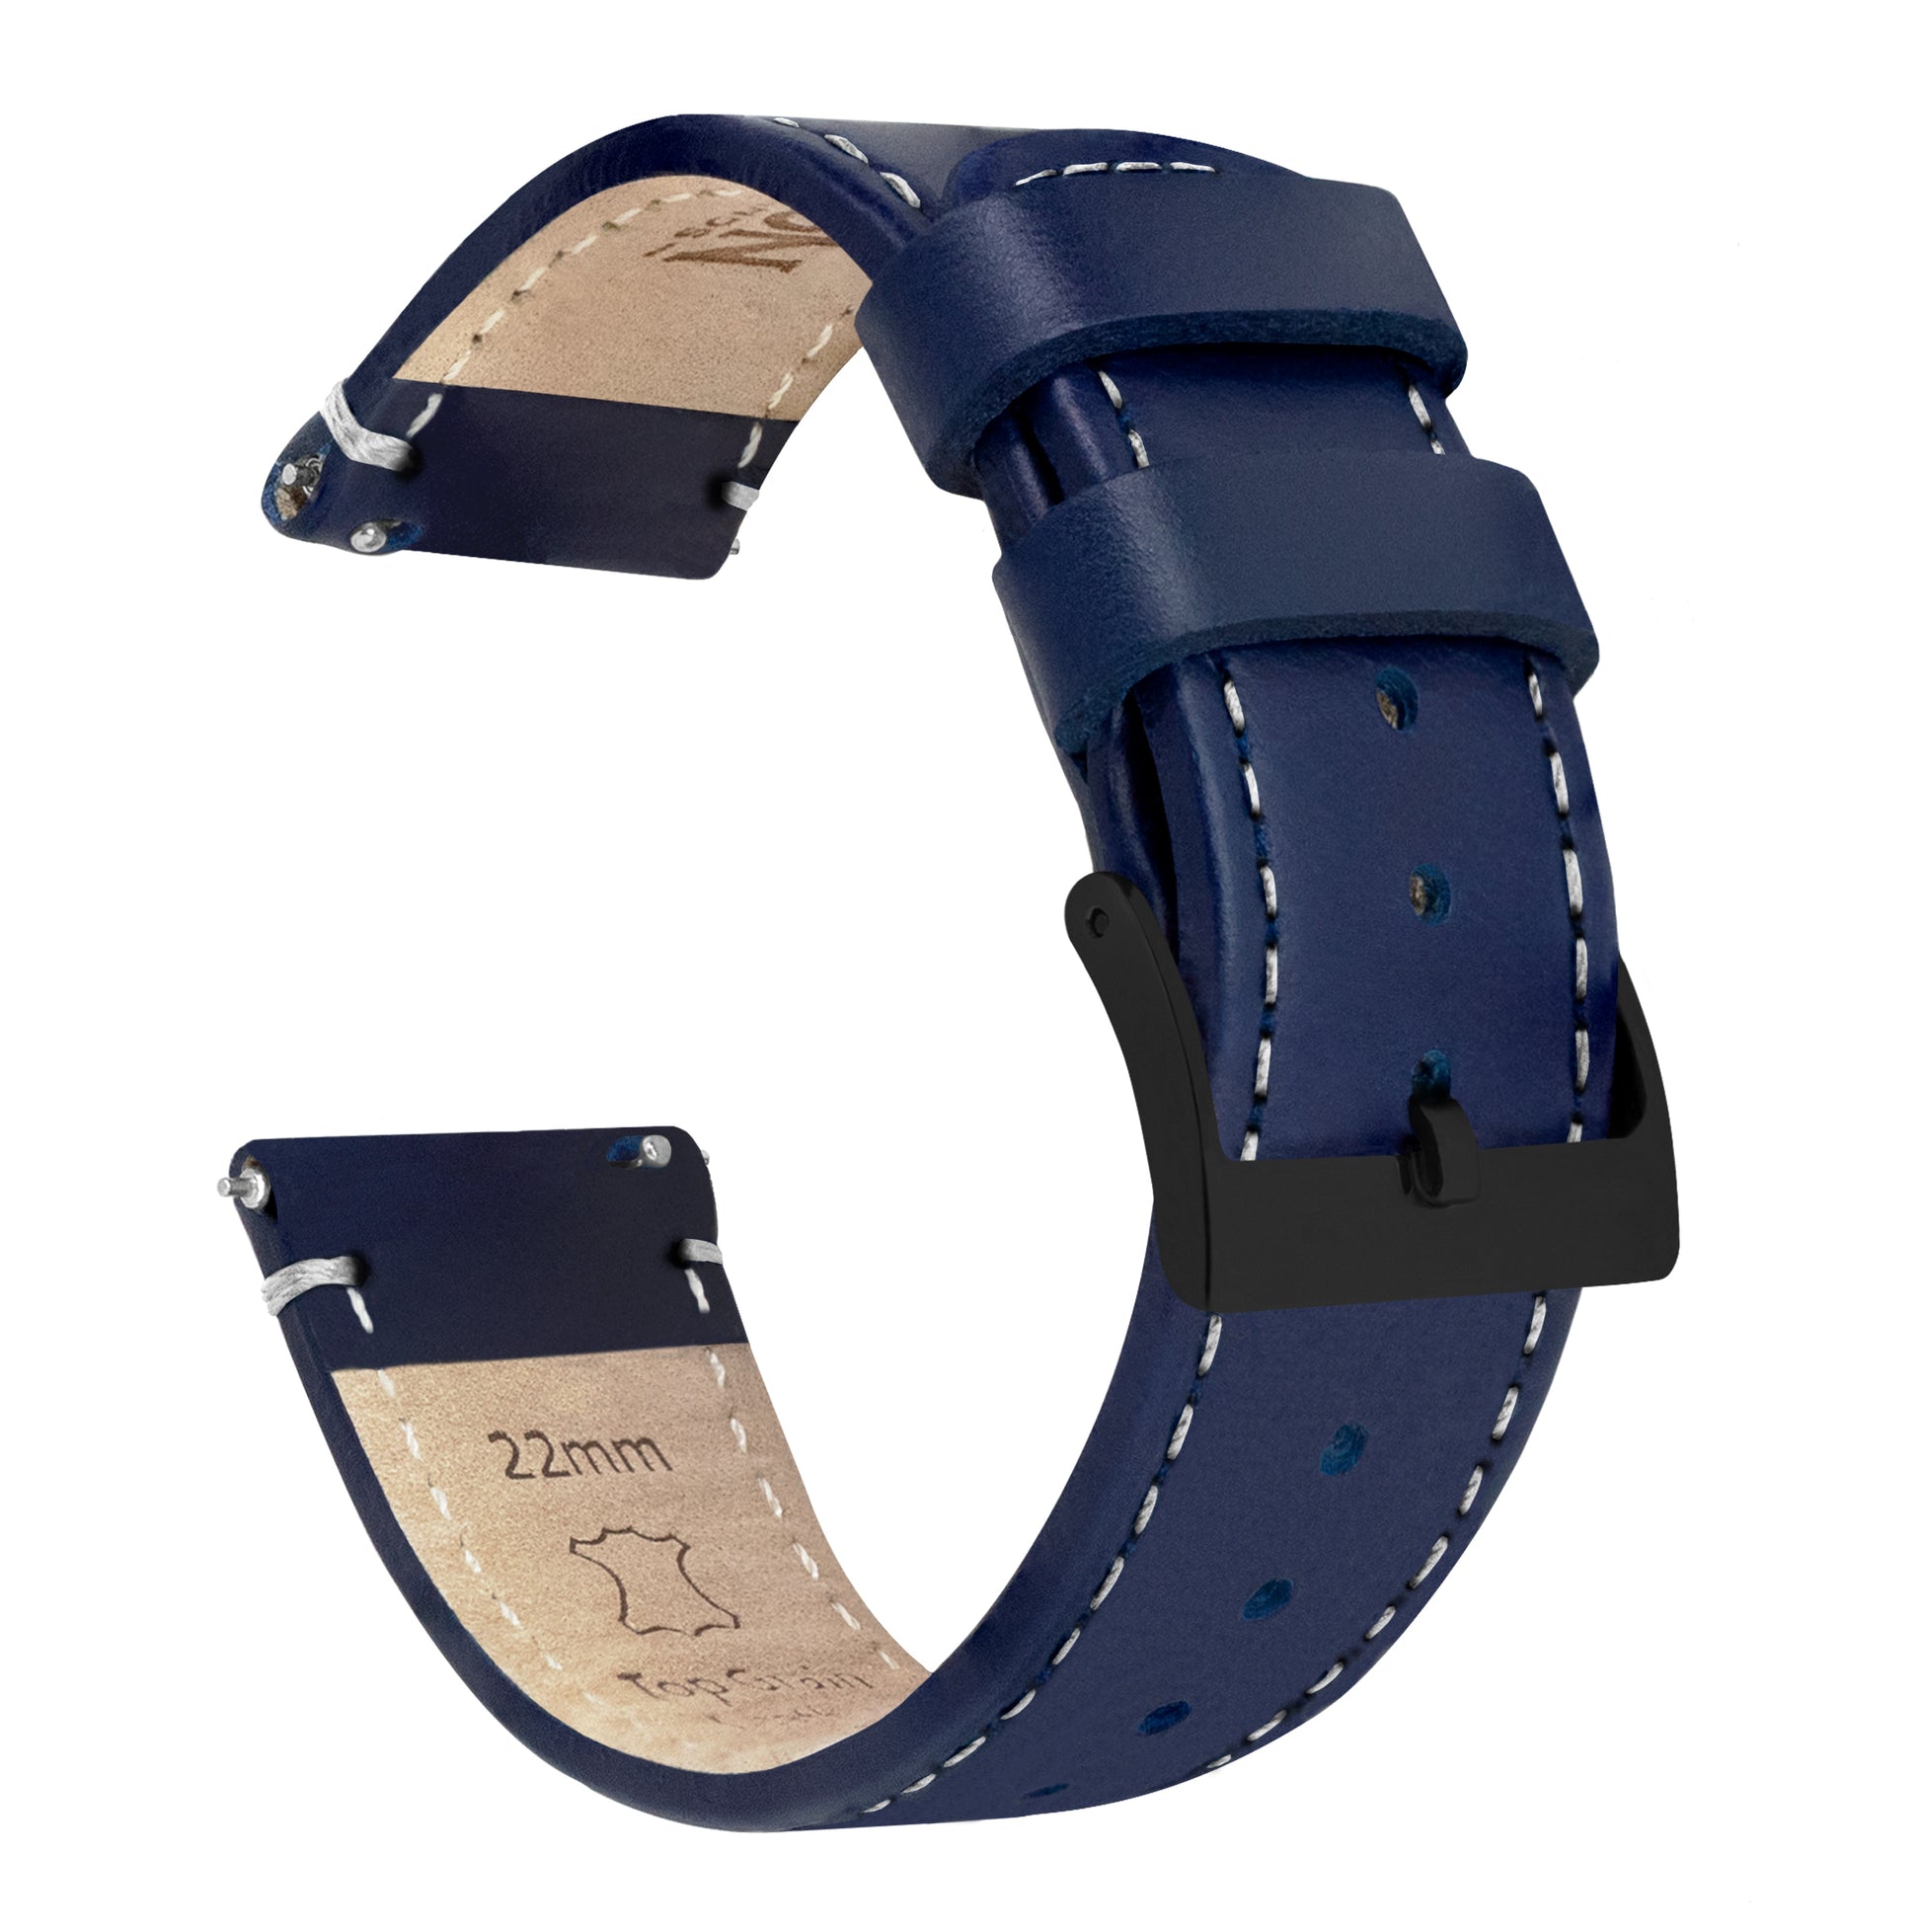 Fossil Sport | Navy Blue Leather & White Stitching - Barton Watch Bands